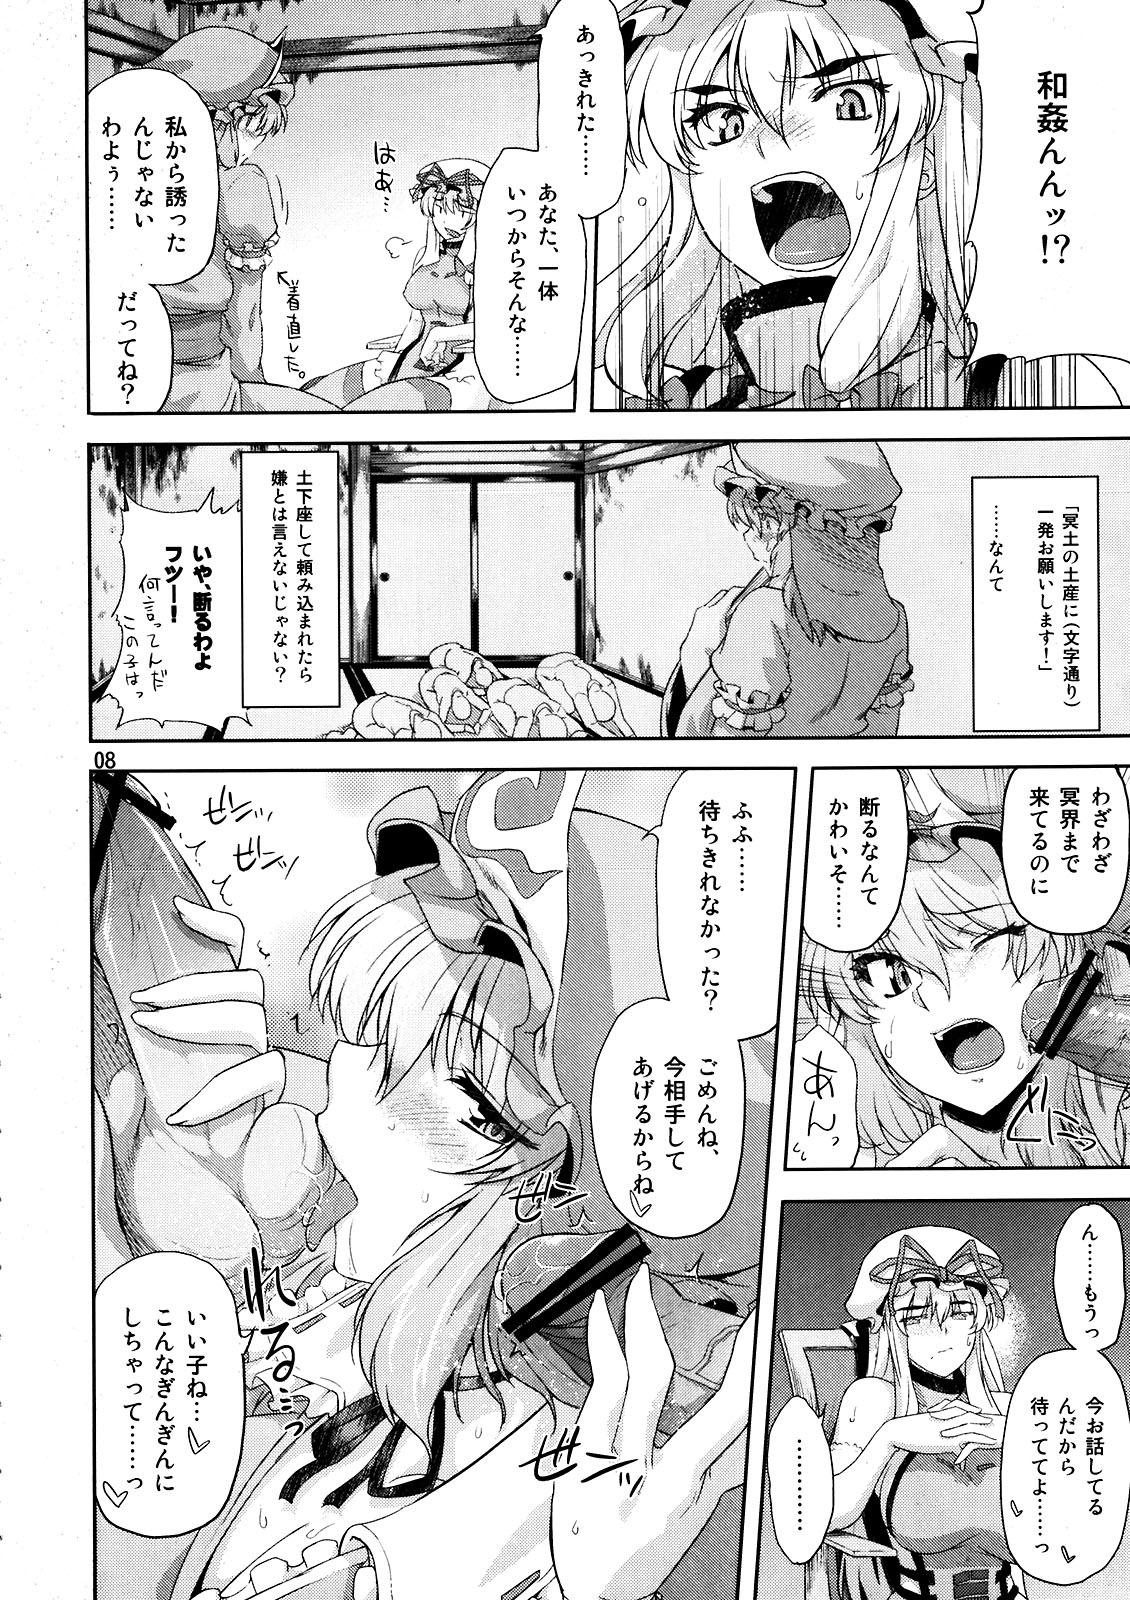 Eating Pussy Toshimaen 0 - Touhou project Fingering - Page 8